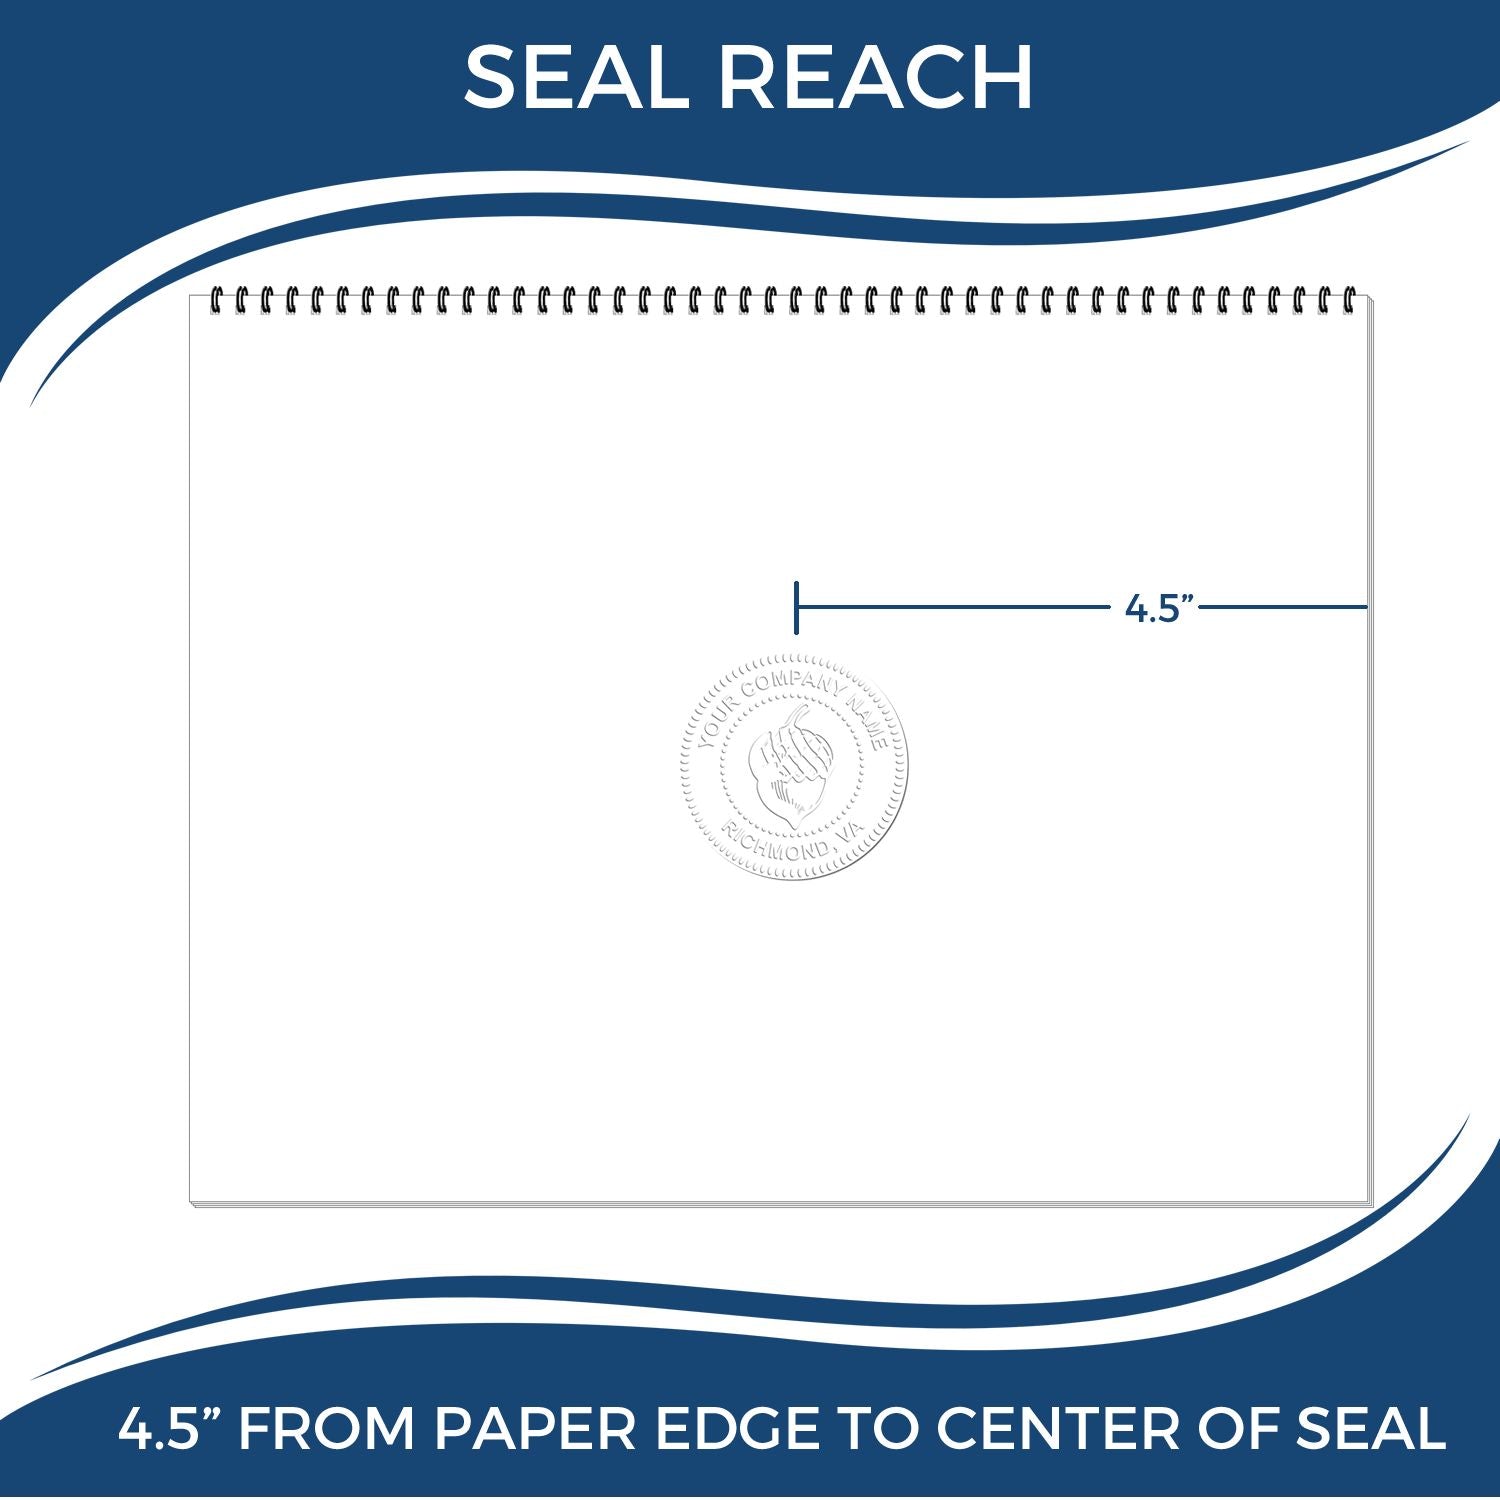 An infographic showing the seal reach which is represented by a ruler and a miniature seal image of the Extended Long Reach Tennessee Surveyor Embosser